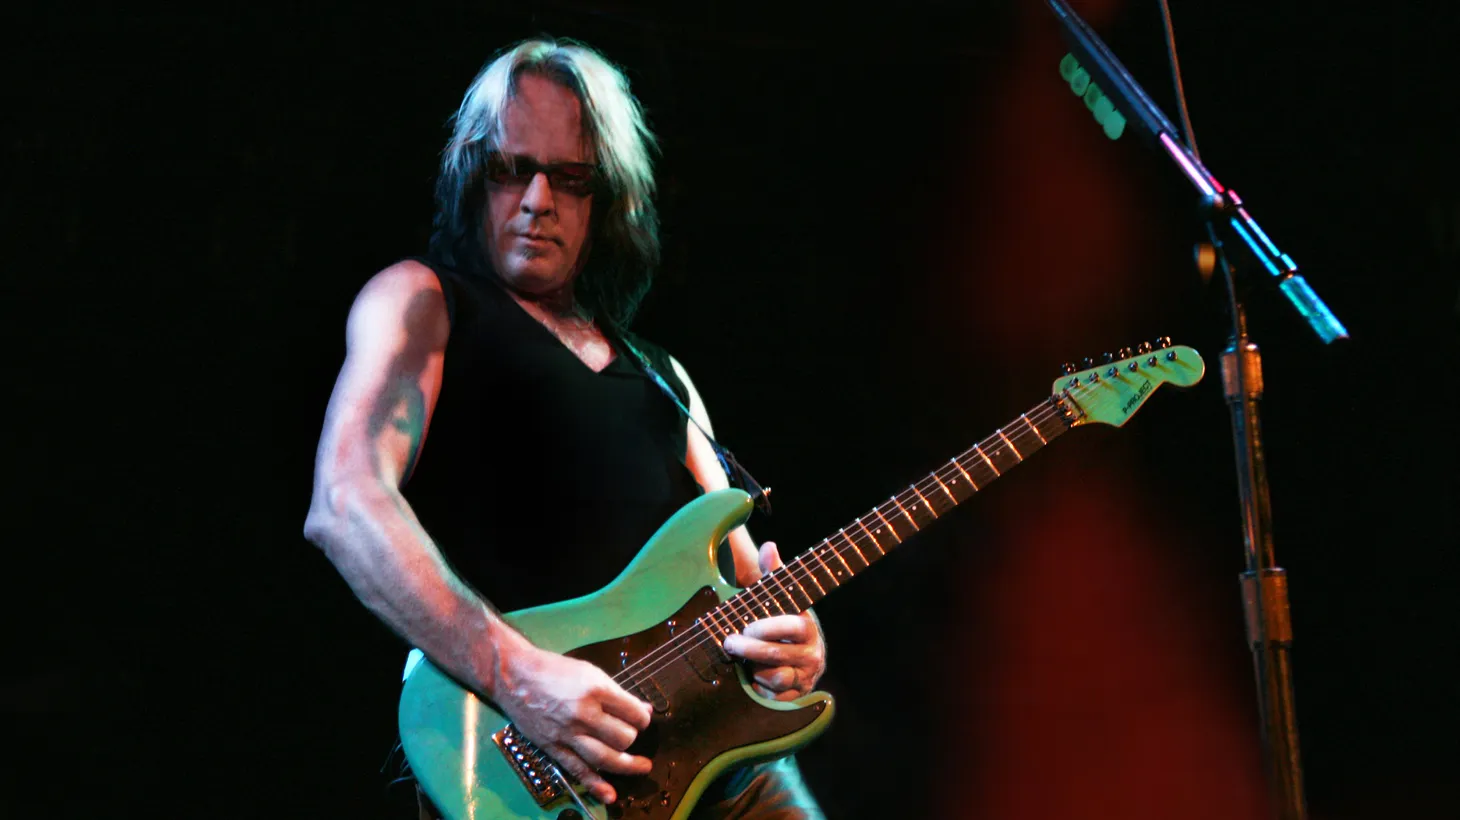 A pioneer in electronic music and progressive rock, Hall of Famer and hella influencer Todd Rundgren has had a stellar career and has now launched his latest album, “Space Force.”